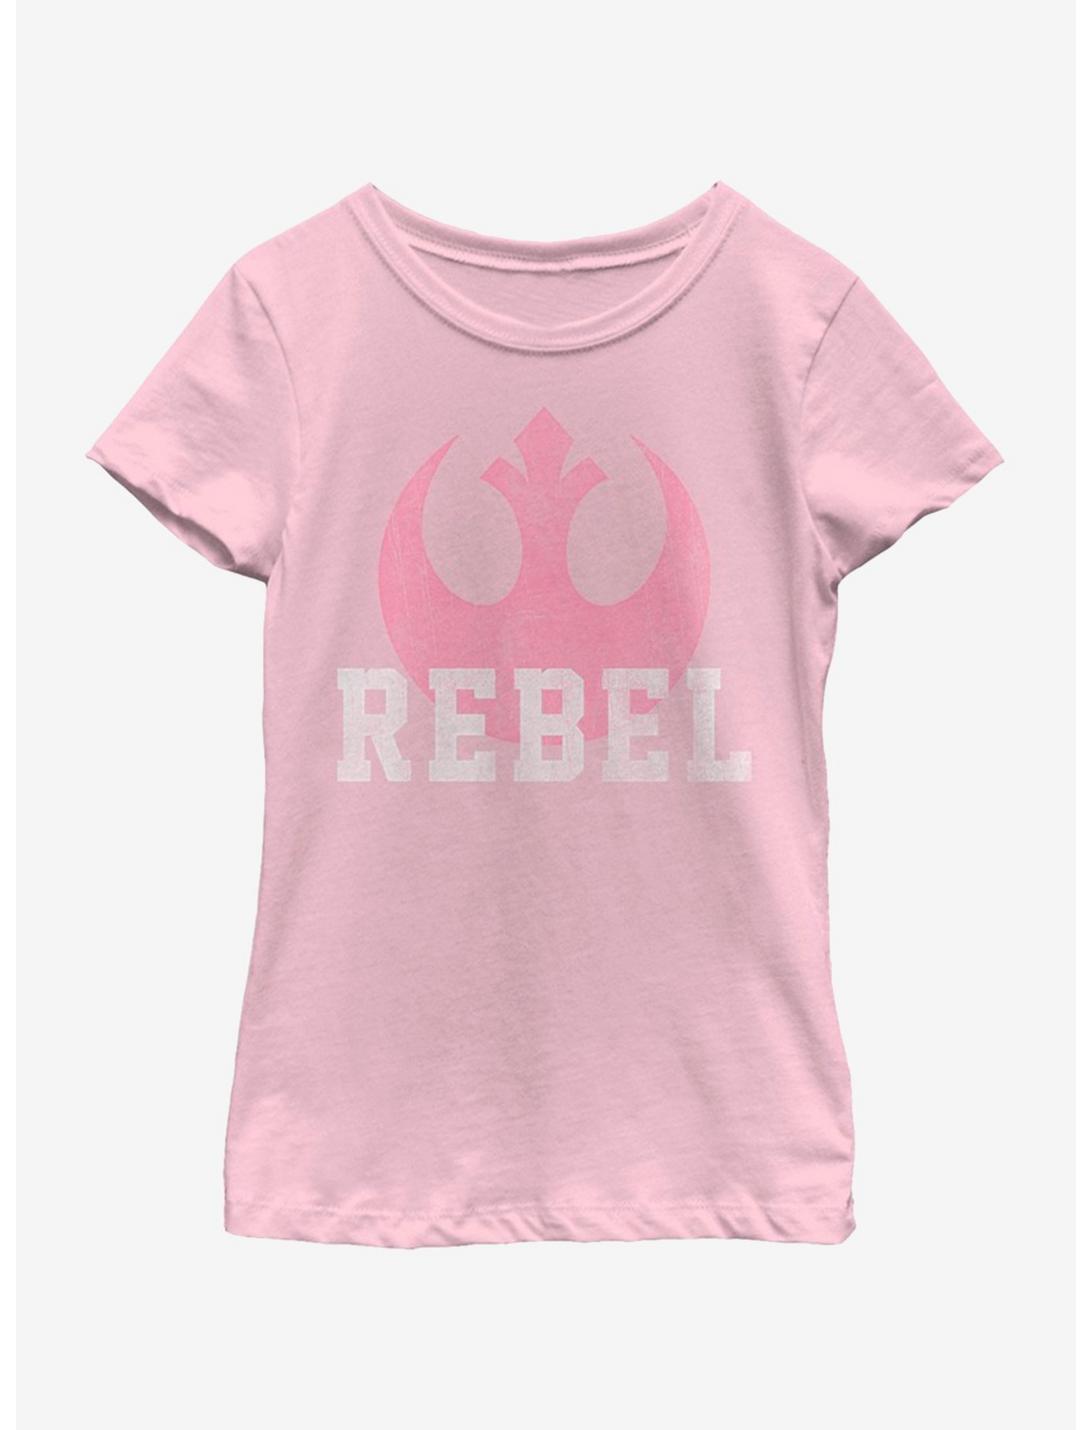 Star Wars The Force Awakens Desert Lace Youth Girls T-Shirt, PINK, hi-res